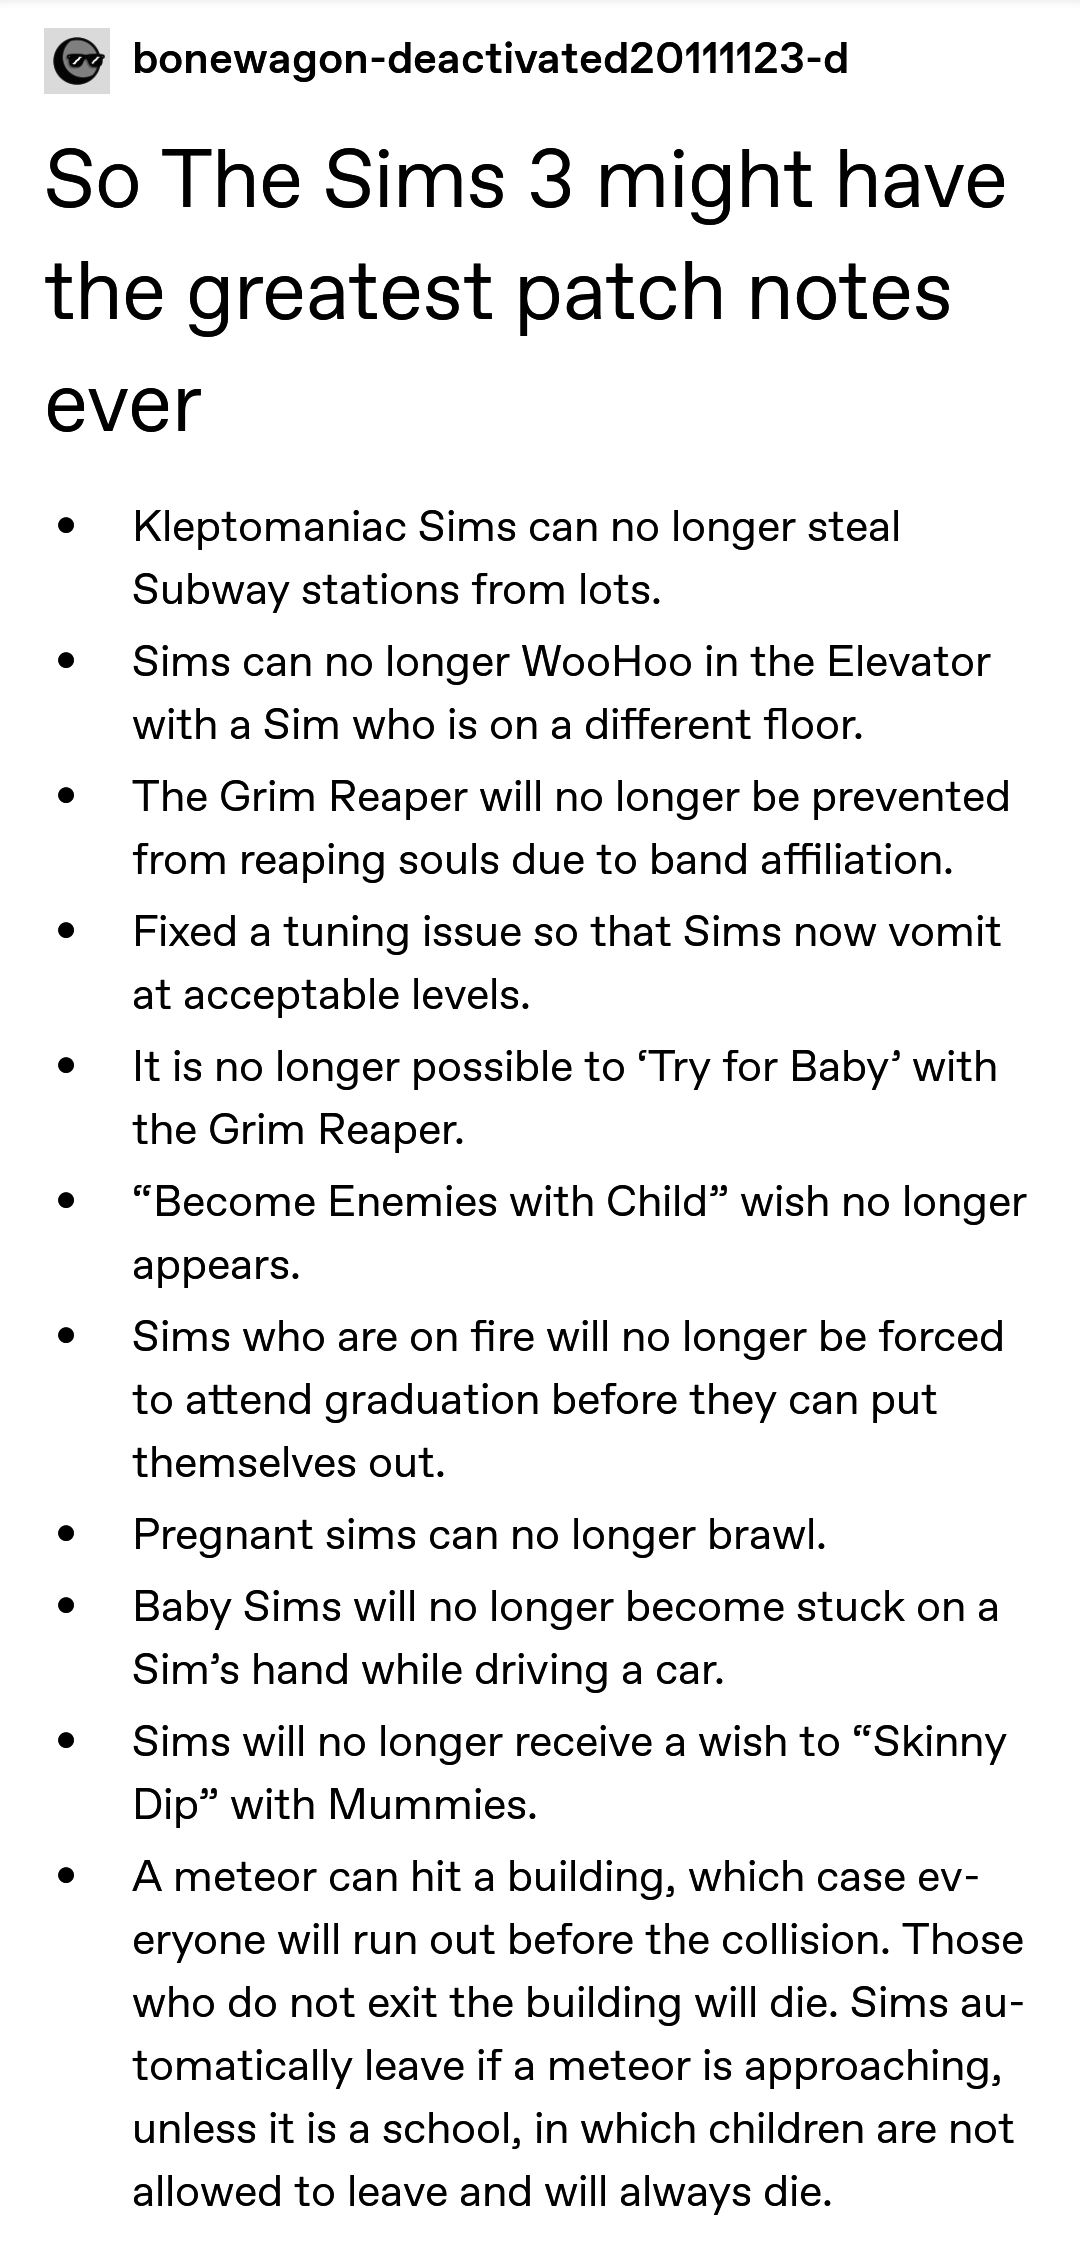 sims 4 patch notes funny